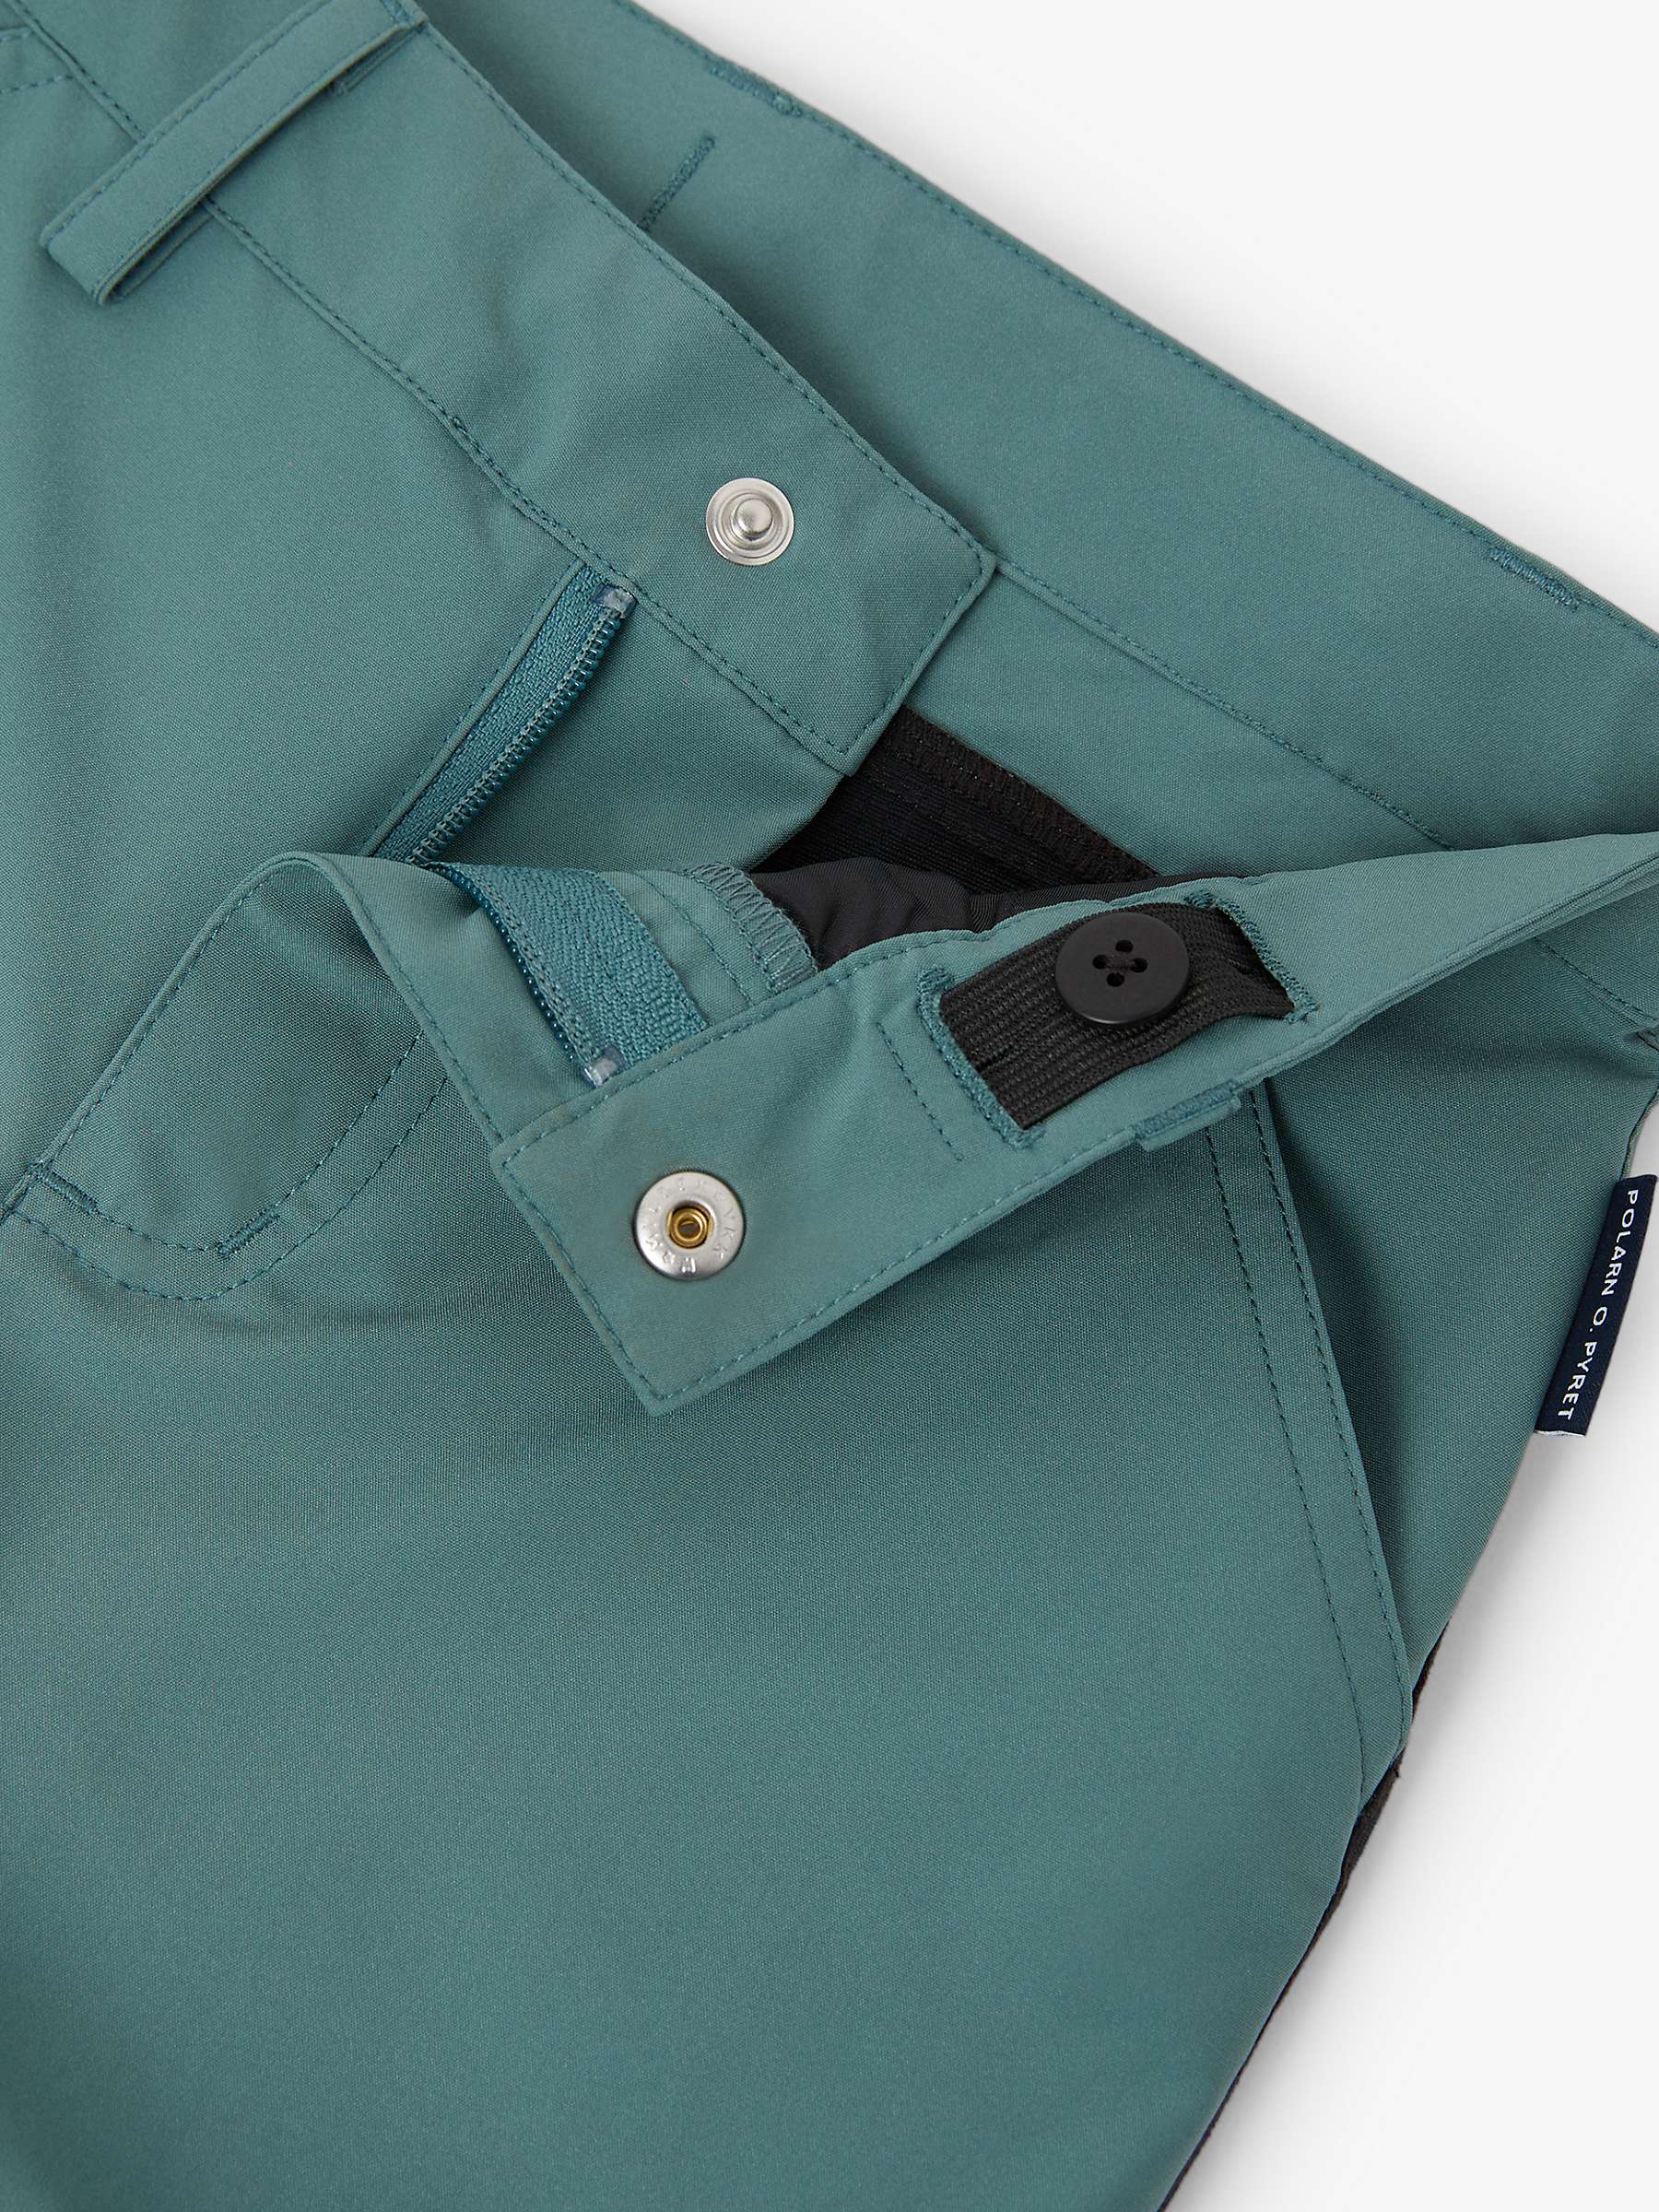 Buy Polarn O. Pyret Kids' Recycled Water Repellent Outerwear Trousers, Blue Teal Online at johnlewis.com